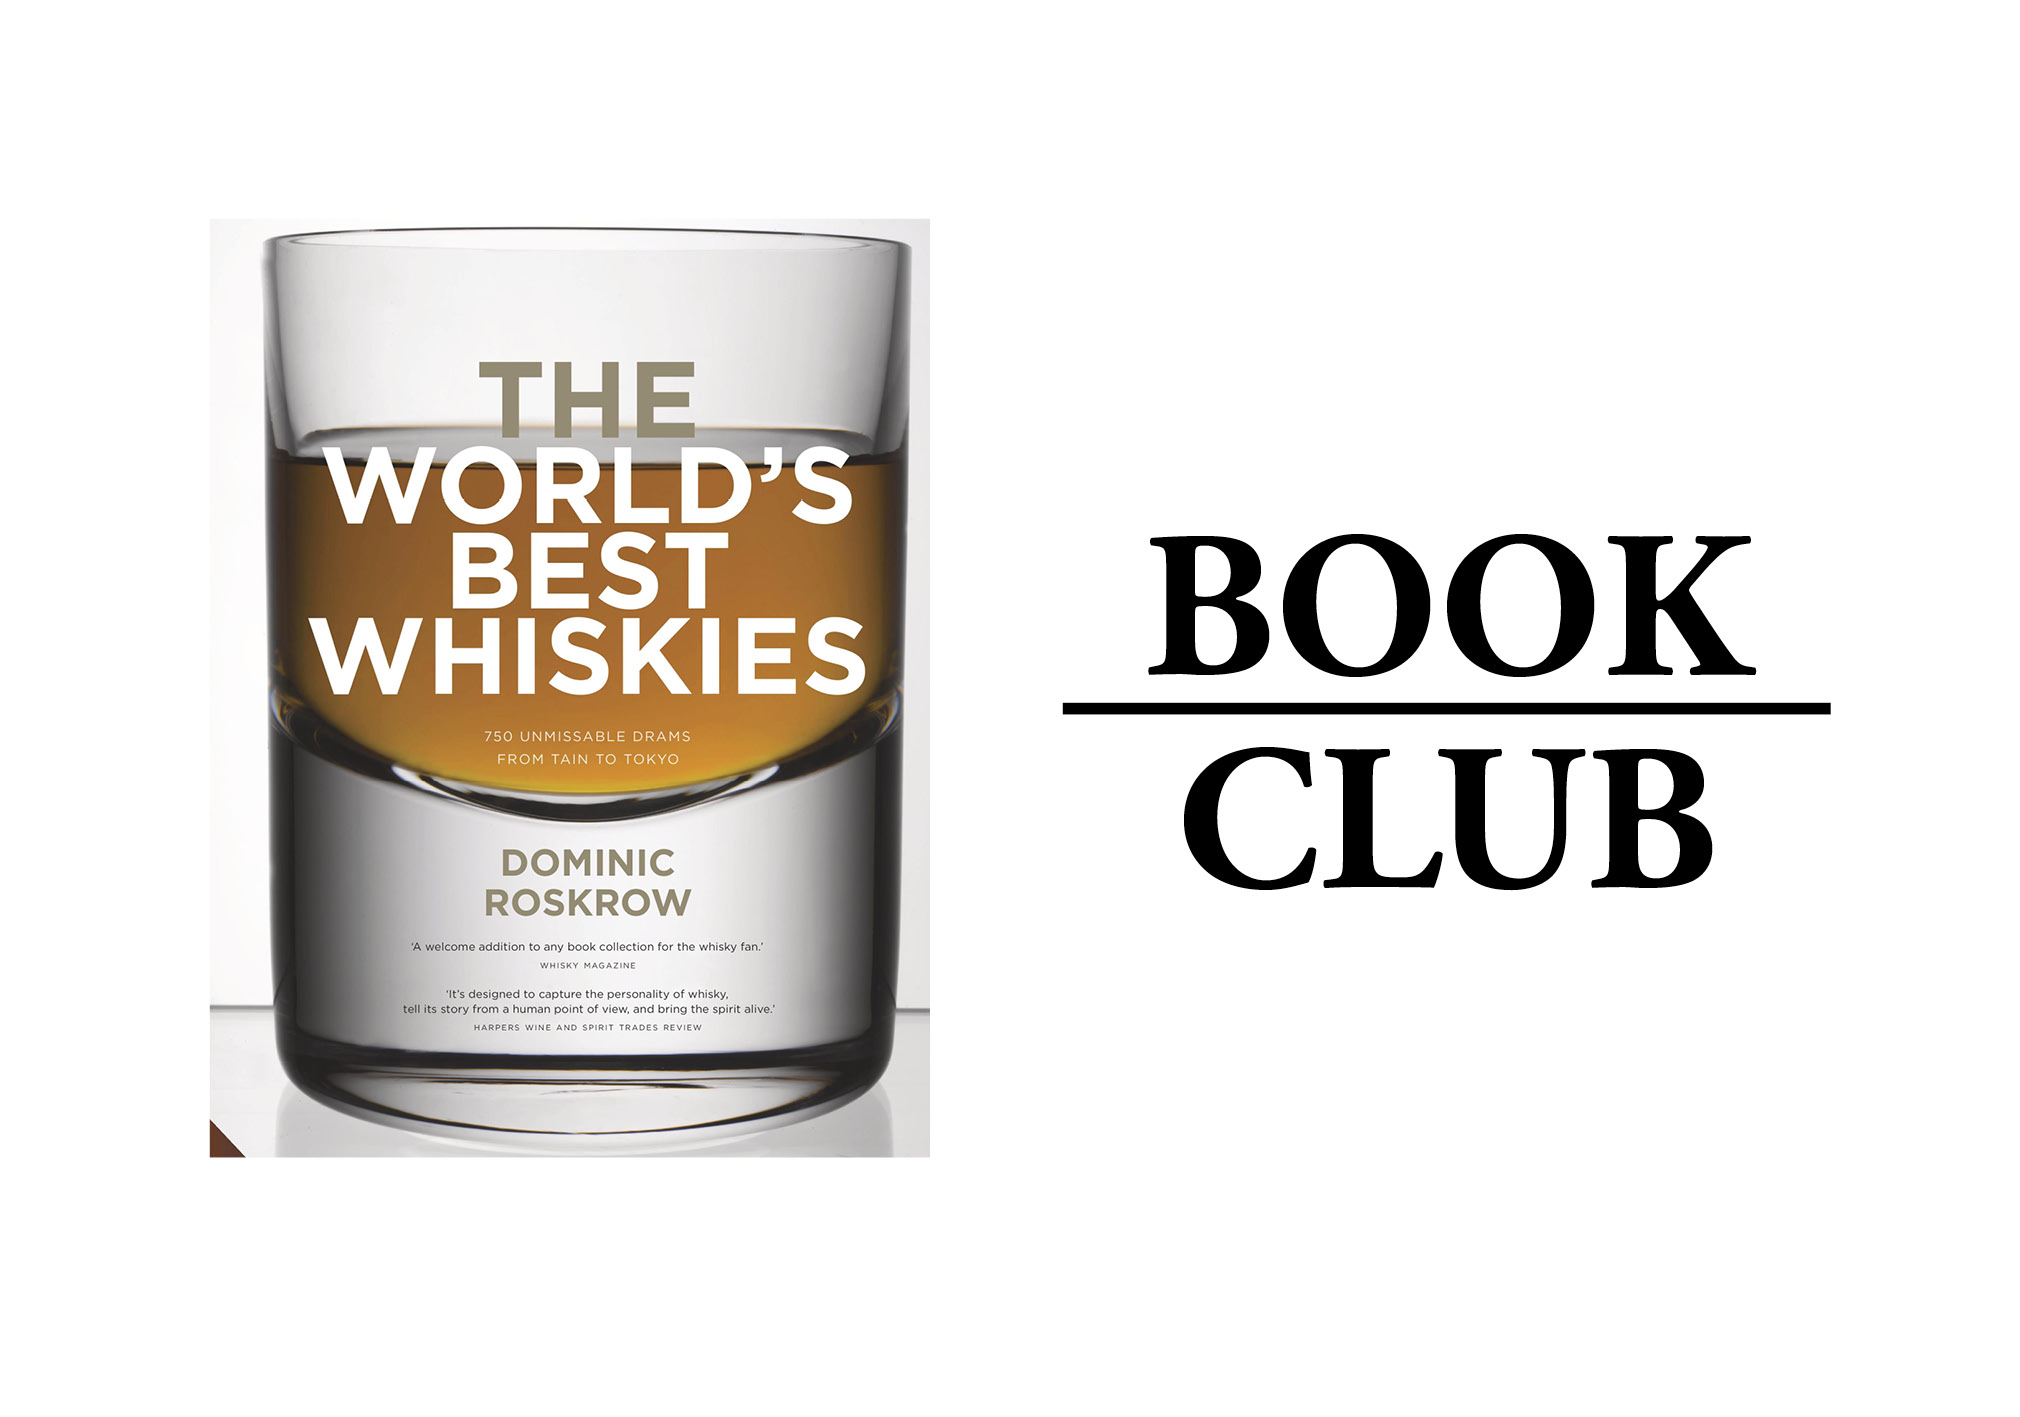 WORLD’S BEST WHISKIES By Dominic Roskrow